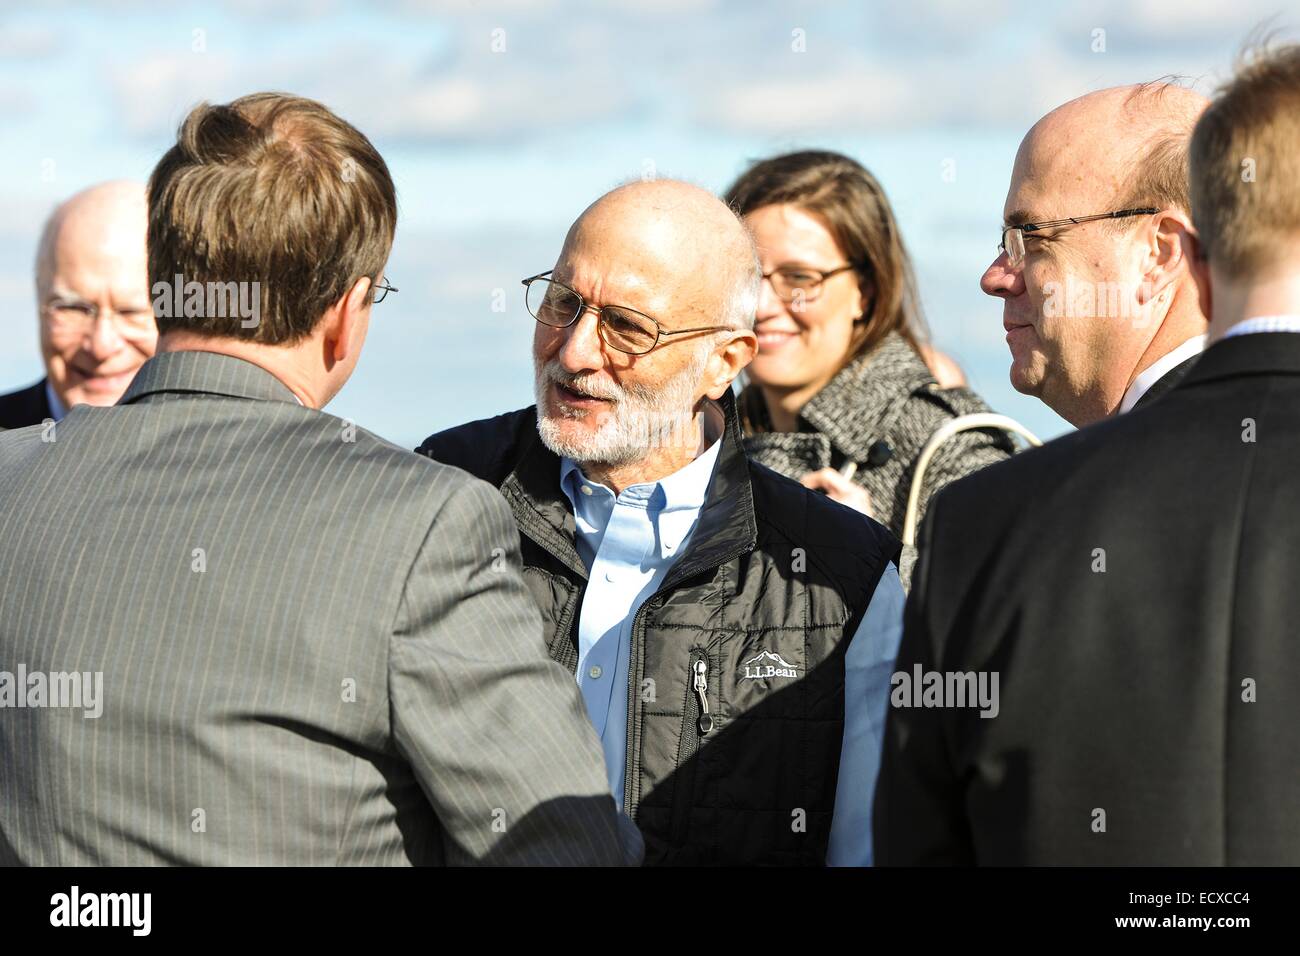 USAID contractor Alan Gross, imprisoned in Cuba for five years, is greeted by Senators and family members after a flight back from Cuba following his release December 17, 2014 at Andrews Air Force Base in Maryland. Stock Photo